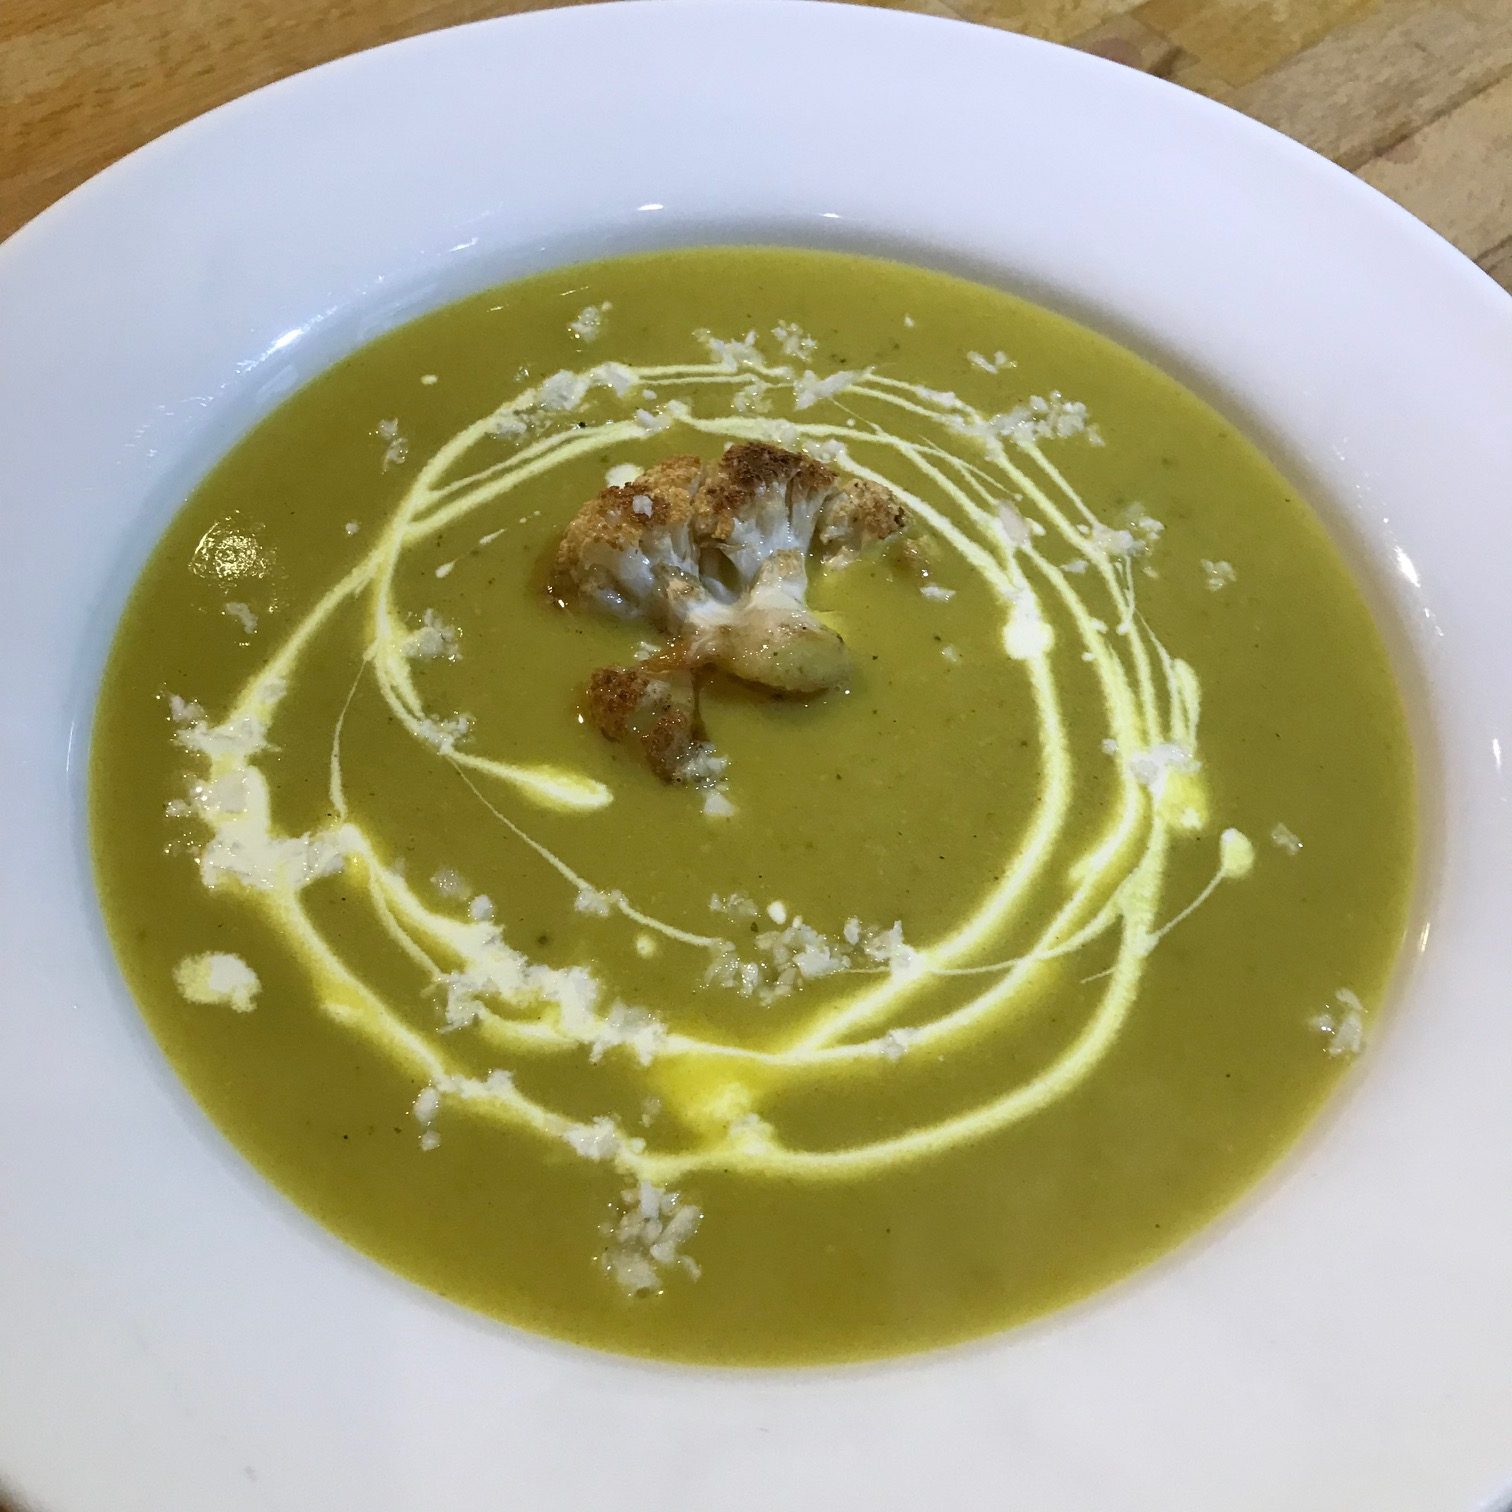 20190830 - Spiced Cauliflower Soup with Roasted Cauliflower and Cauliflower Cous Cous